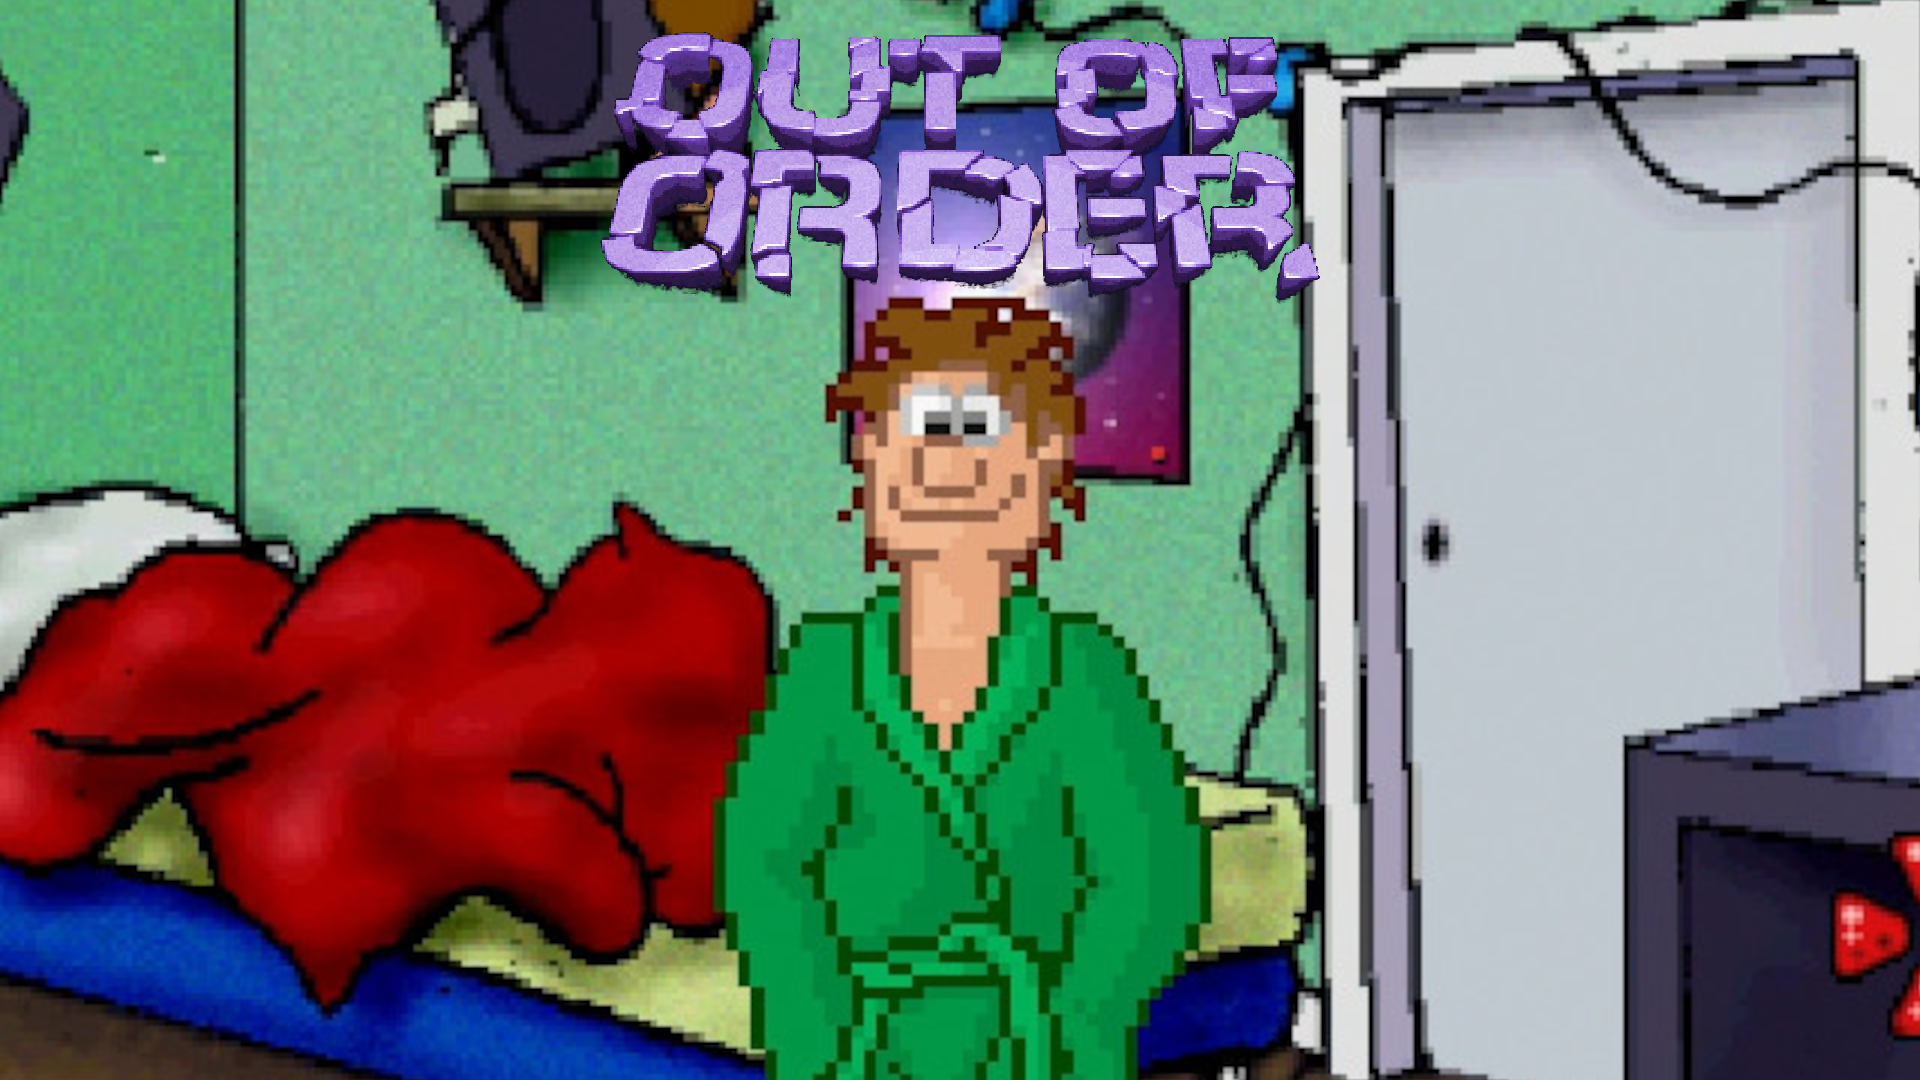 This Whole Playlist is Out of Order! – Let’s Play Out of Order Part 2 [Free-to-Play Friday]